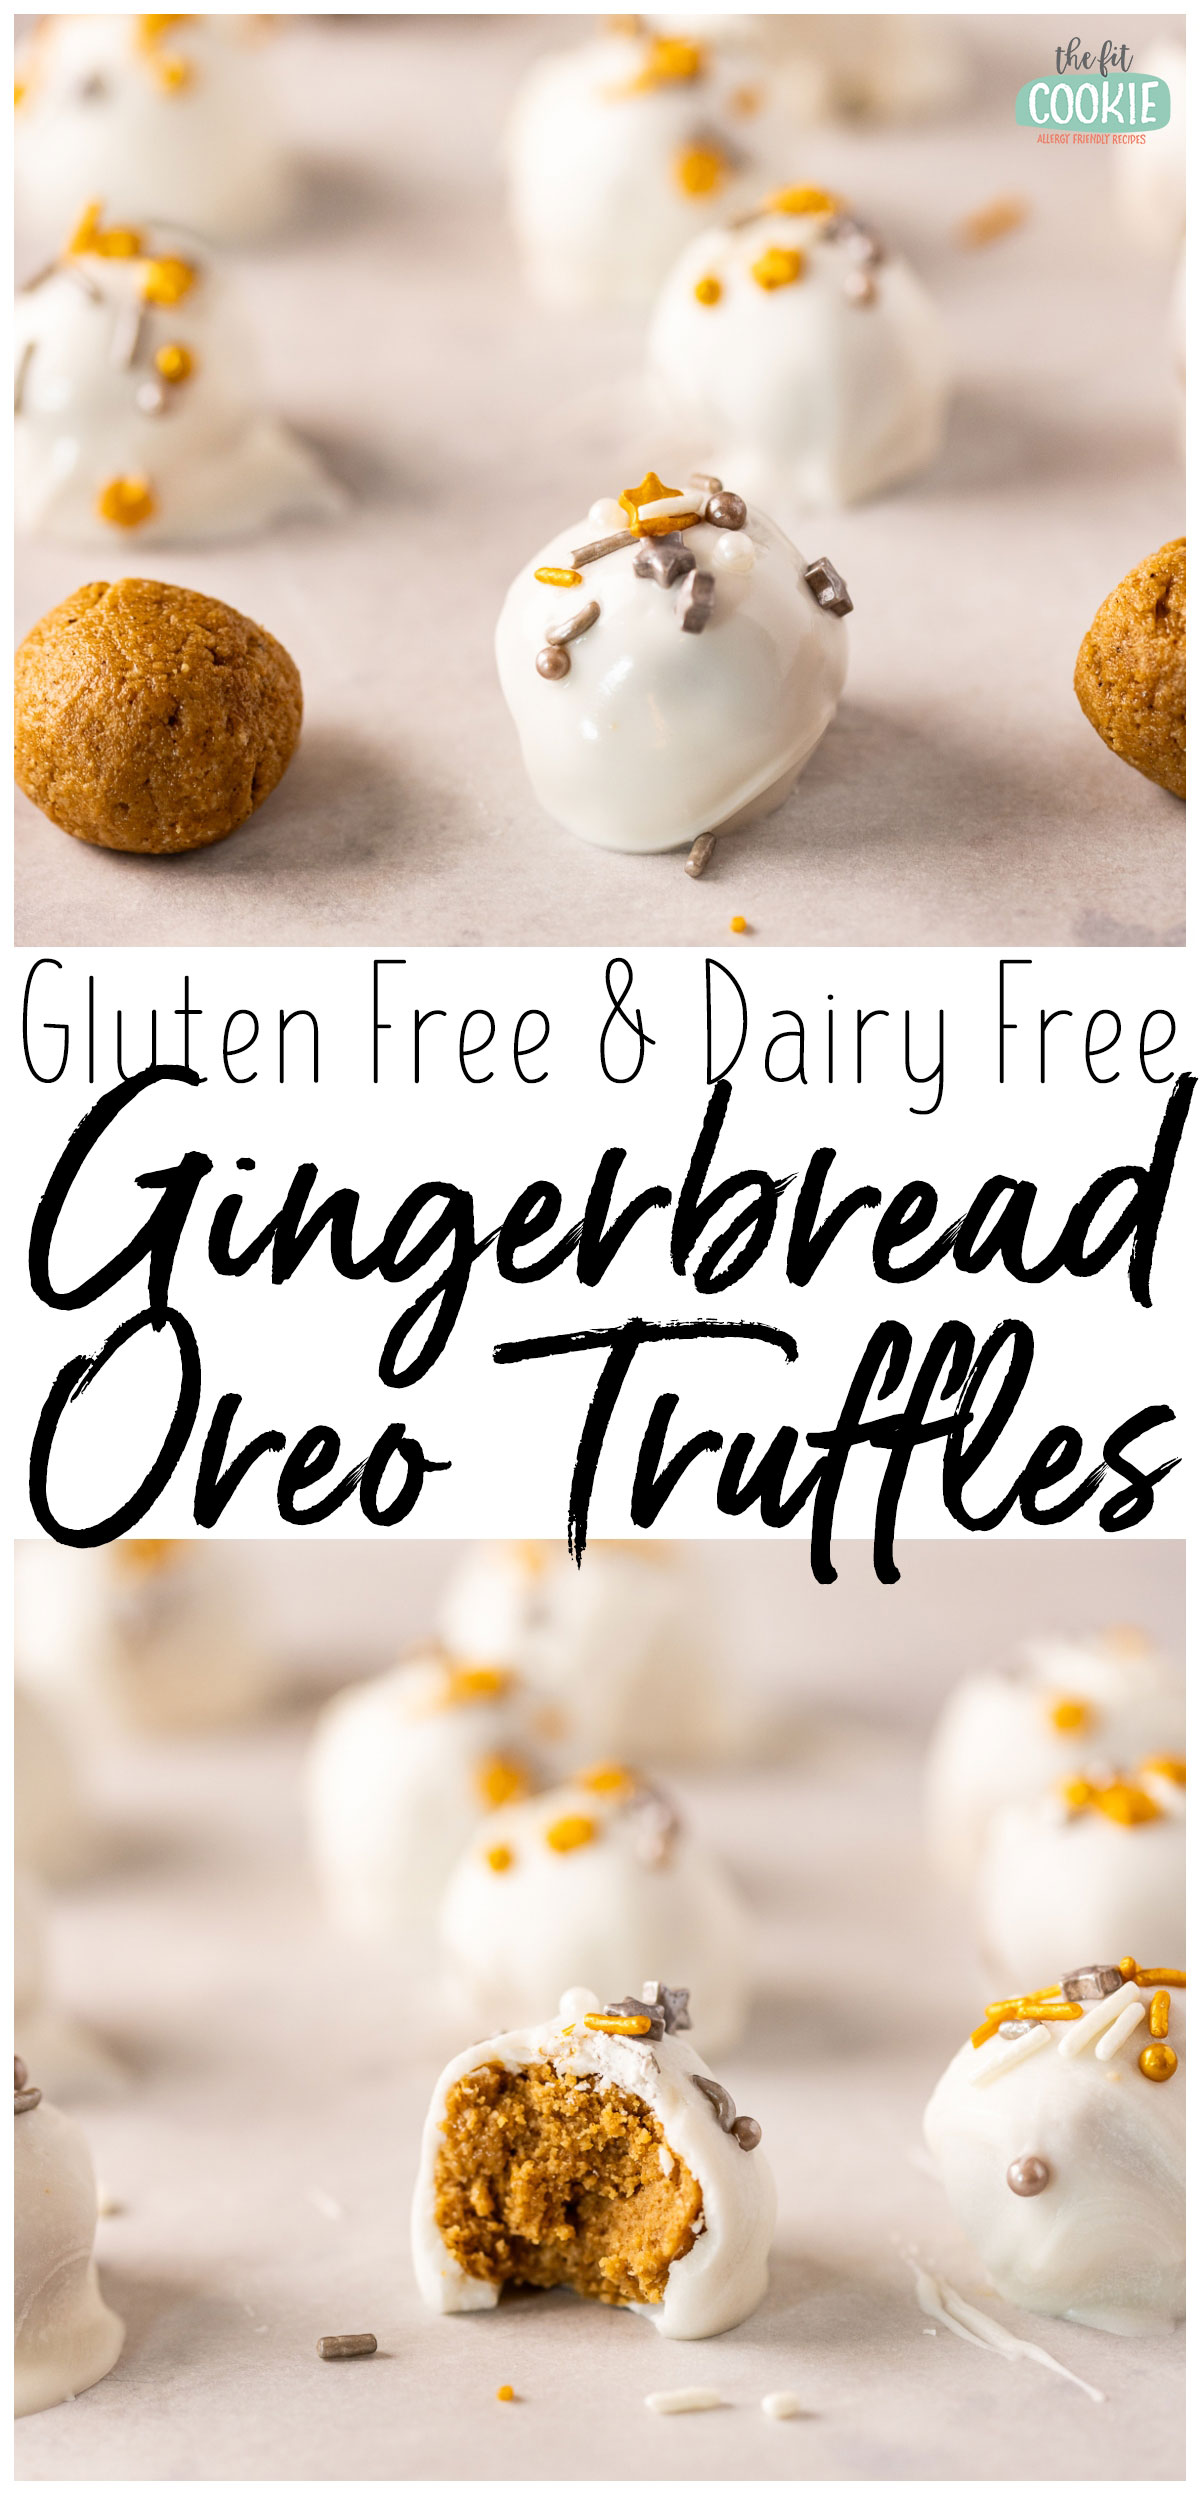 Photo collage showing 2 views of gluten free and dairy free Gingerbread Oreo Truffles.